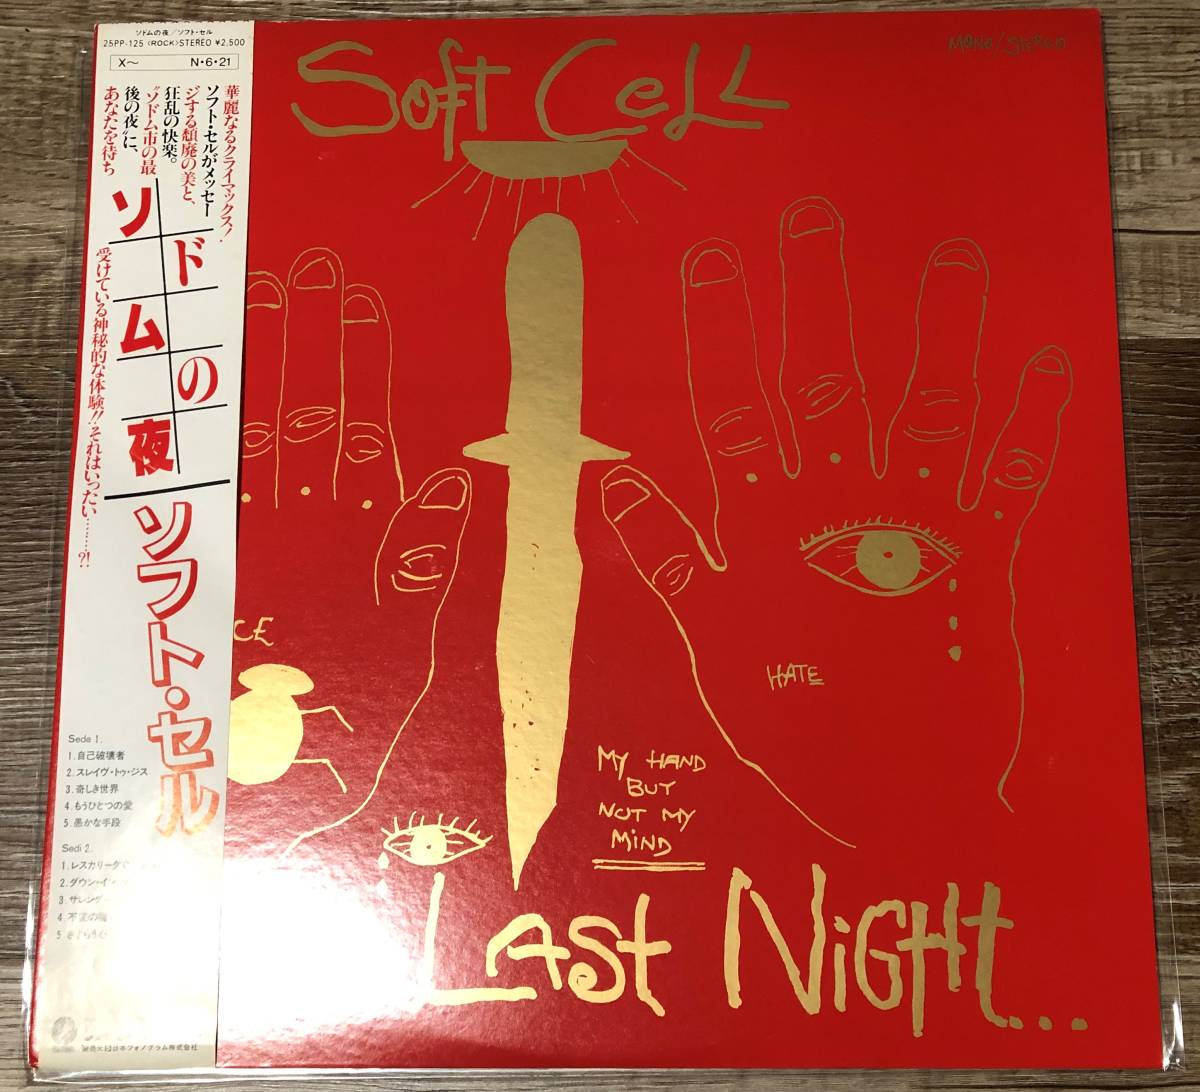 LP【New Wave】Soft Cell / This Last Night In Sodom【25PP-125 希少！国内盤帯付き・Marc Almon・ソフトセル・ソドムの夜】の画像1